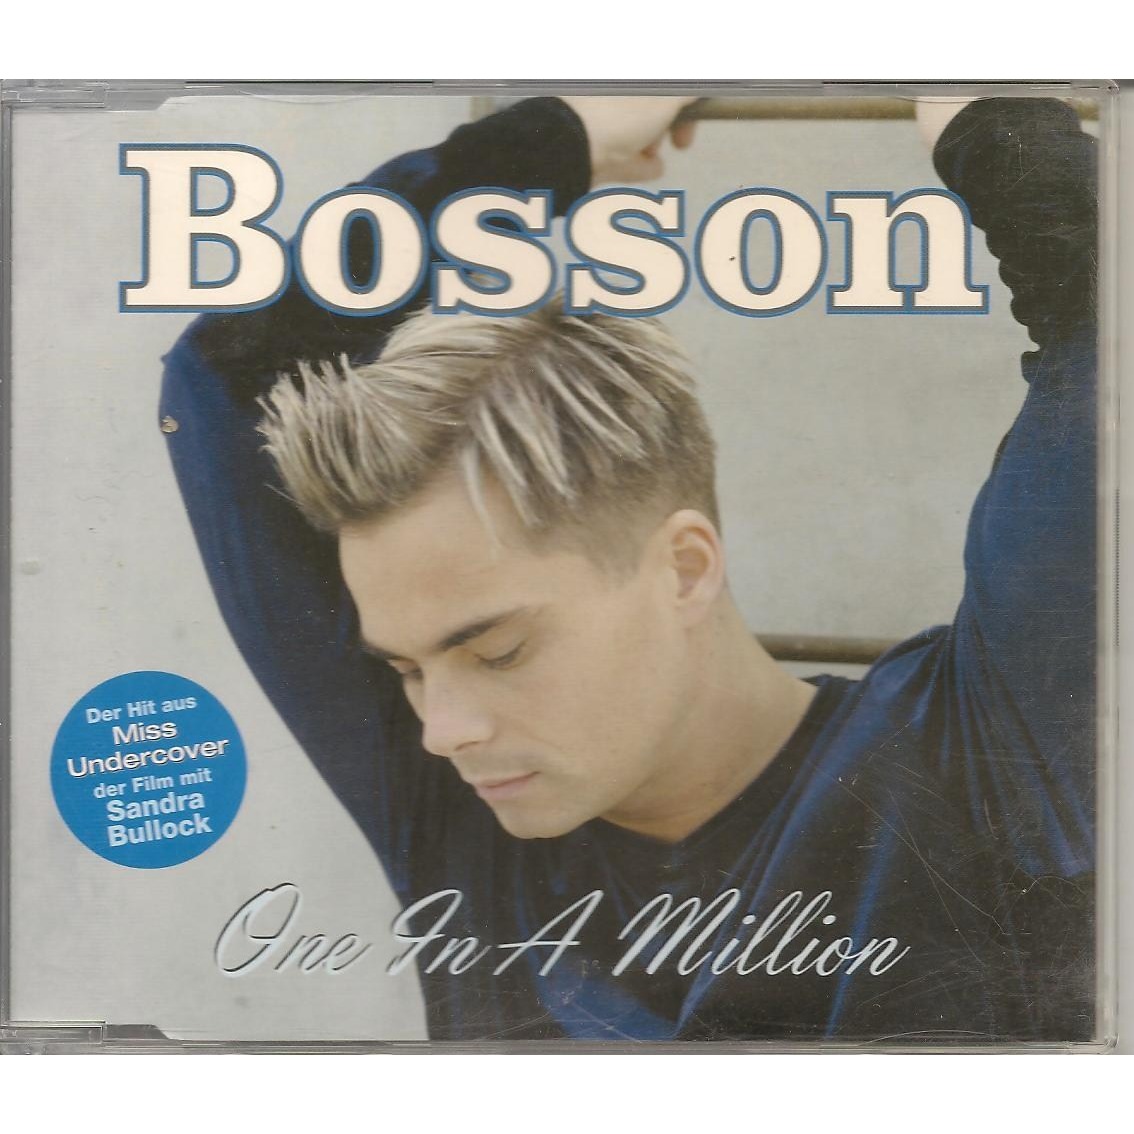 Bosson - One In A Million (remix)